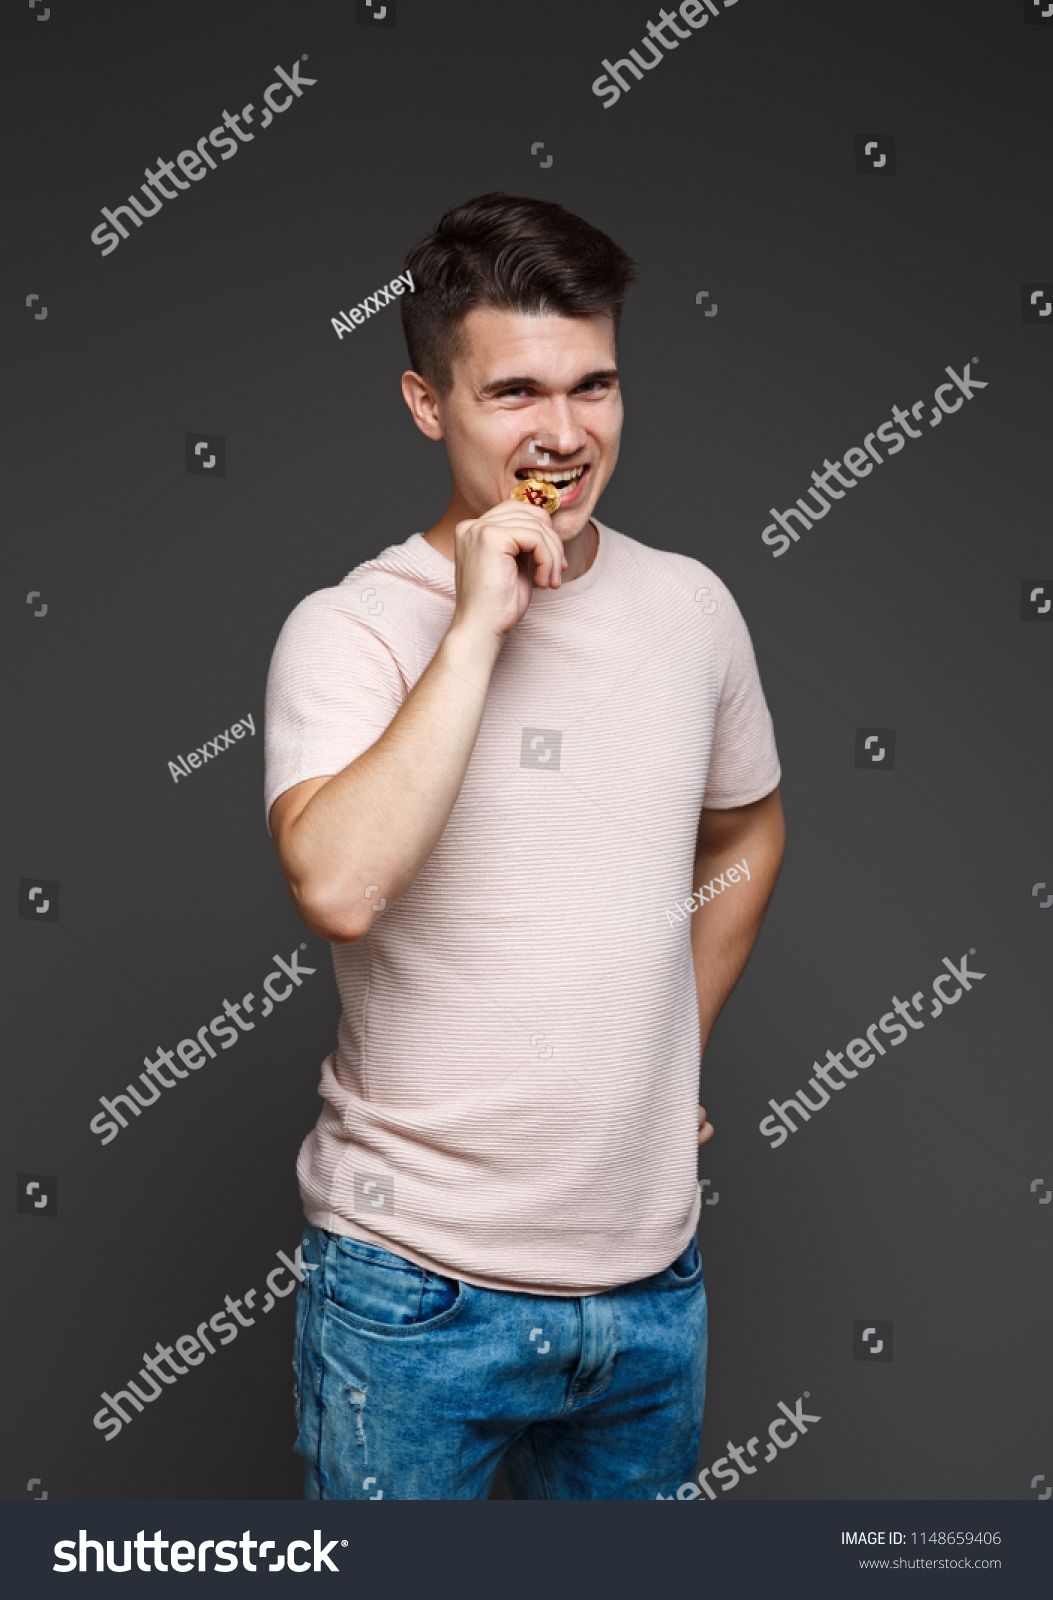 young guy bites a coin bitcoin with his teeth, checking for authenticity, isolated on a gray background. #1148659406